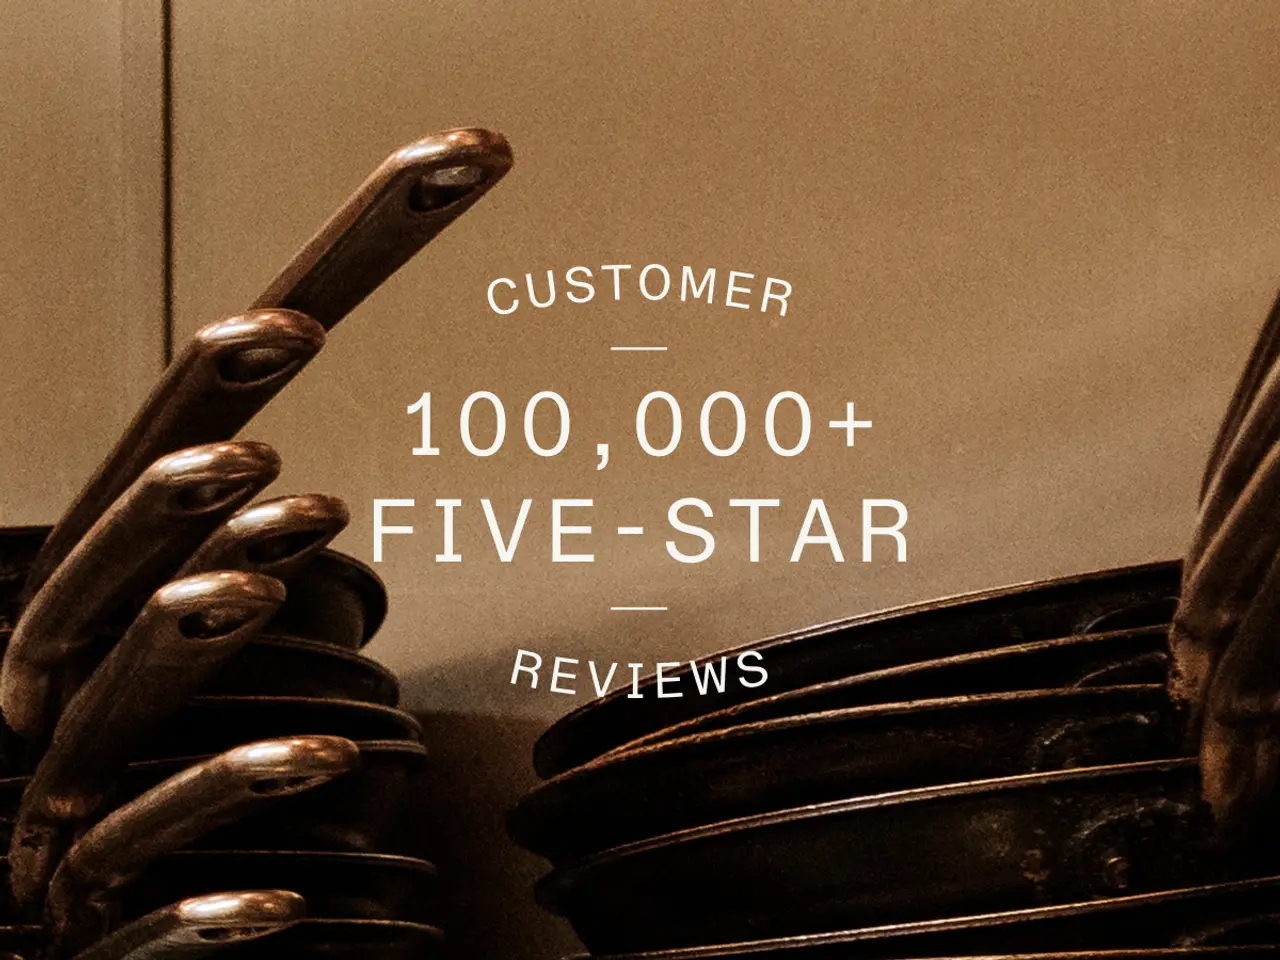 A display boasts over 100,000 five-star customer reviews above a collection of stacked cooking pans.